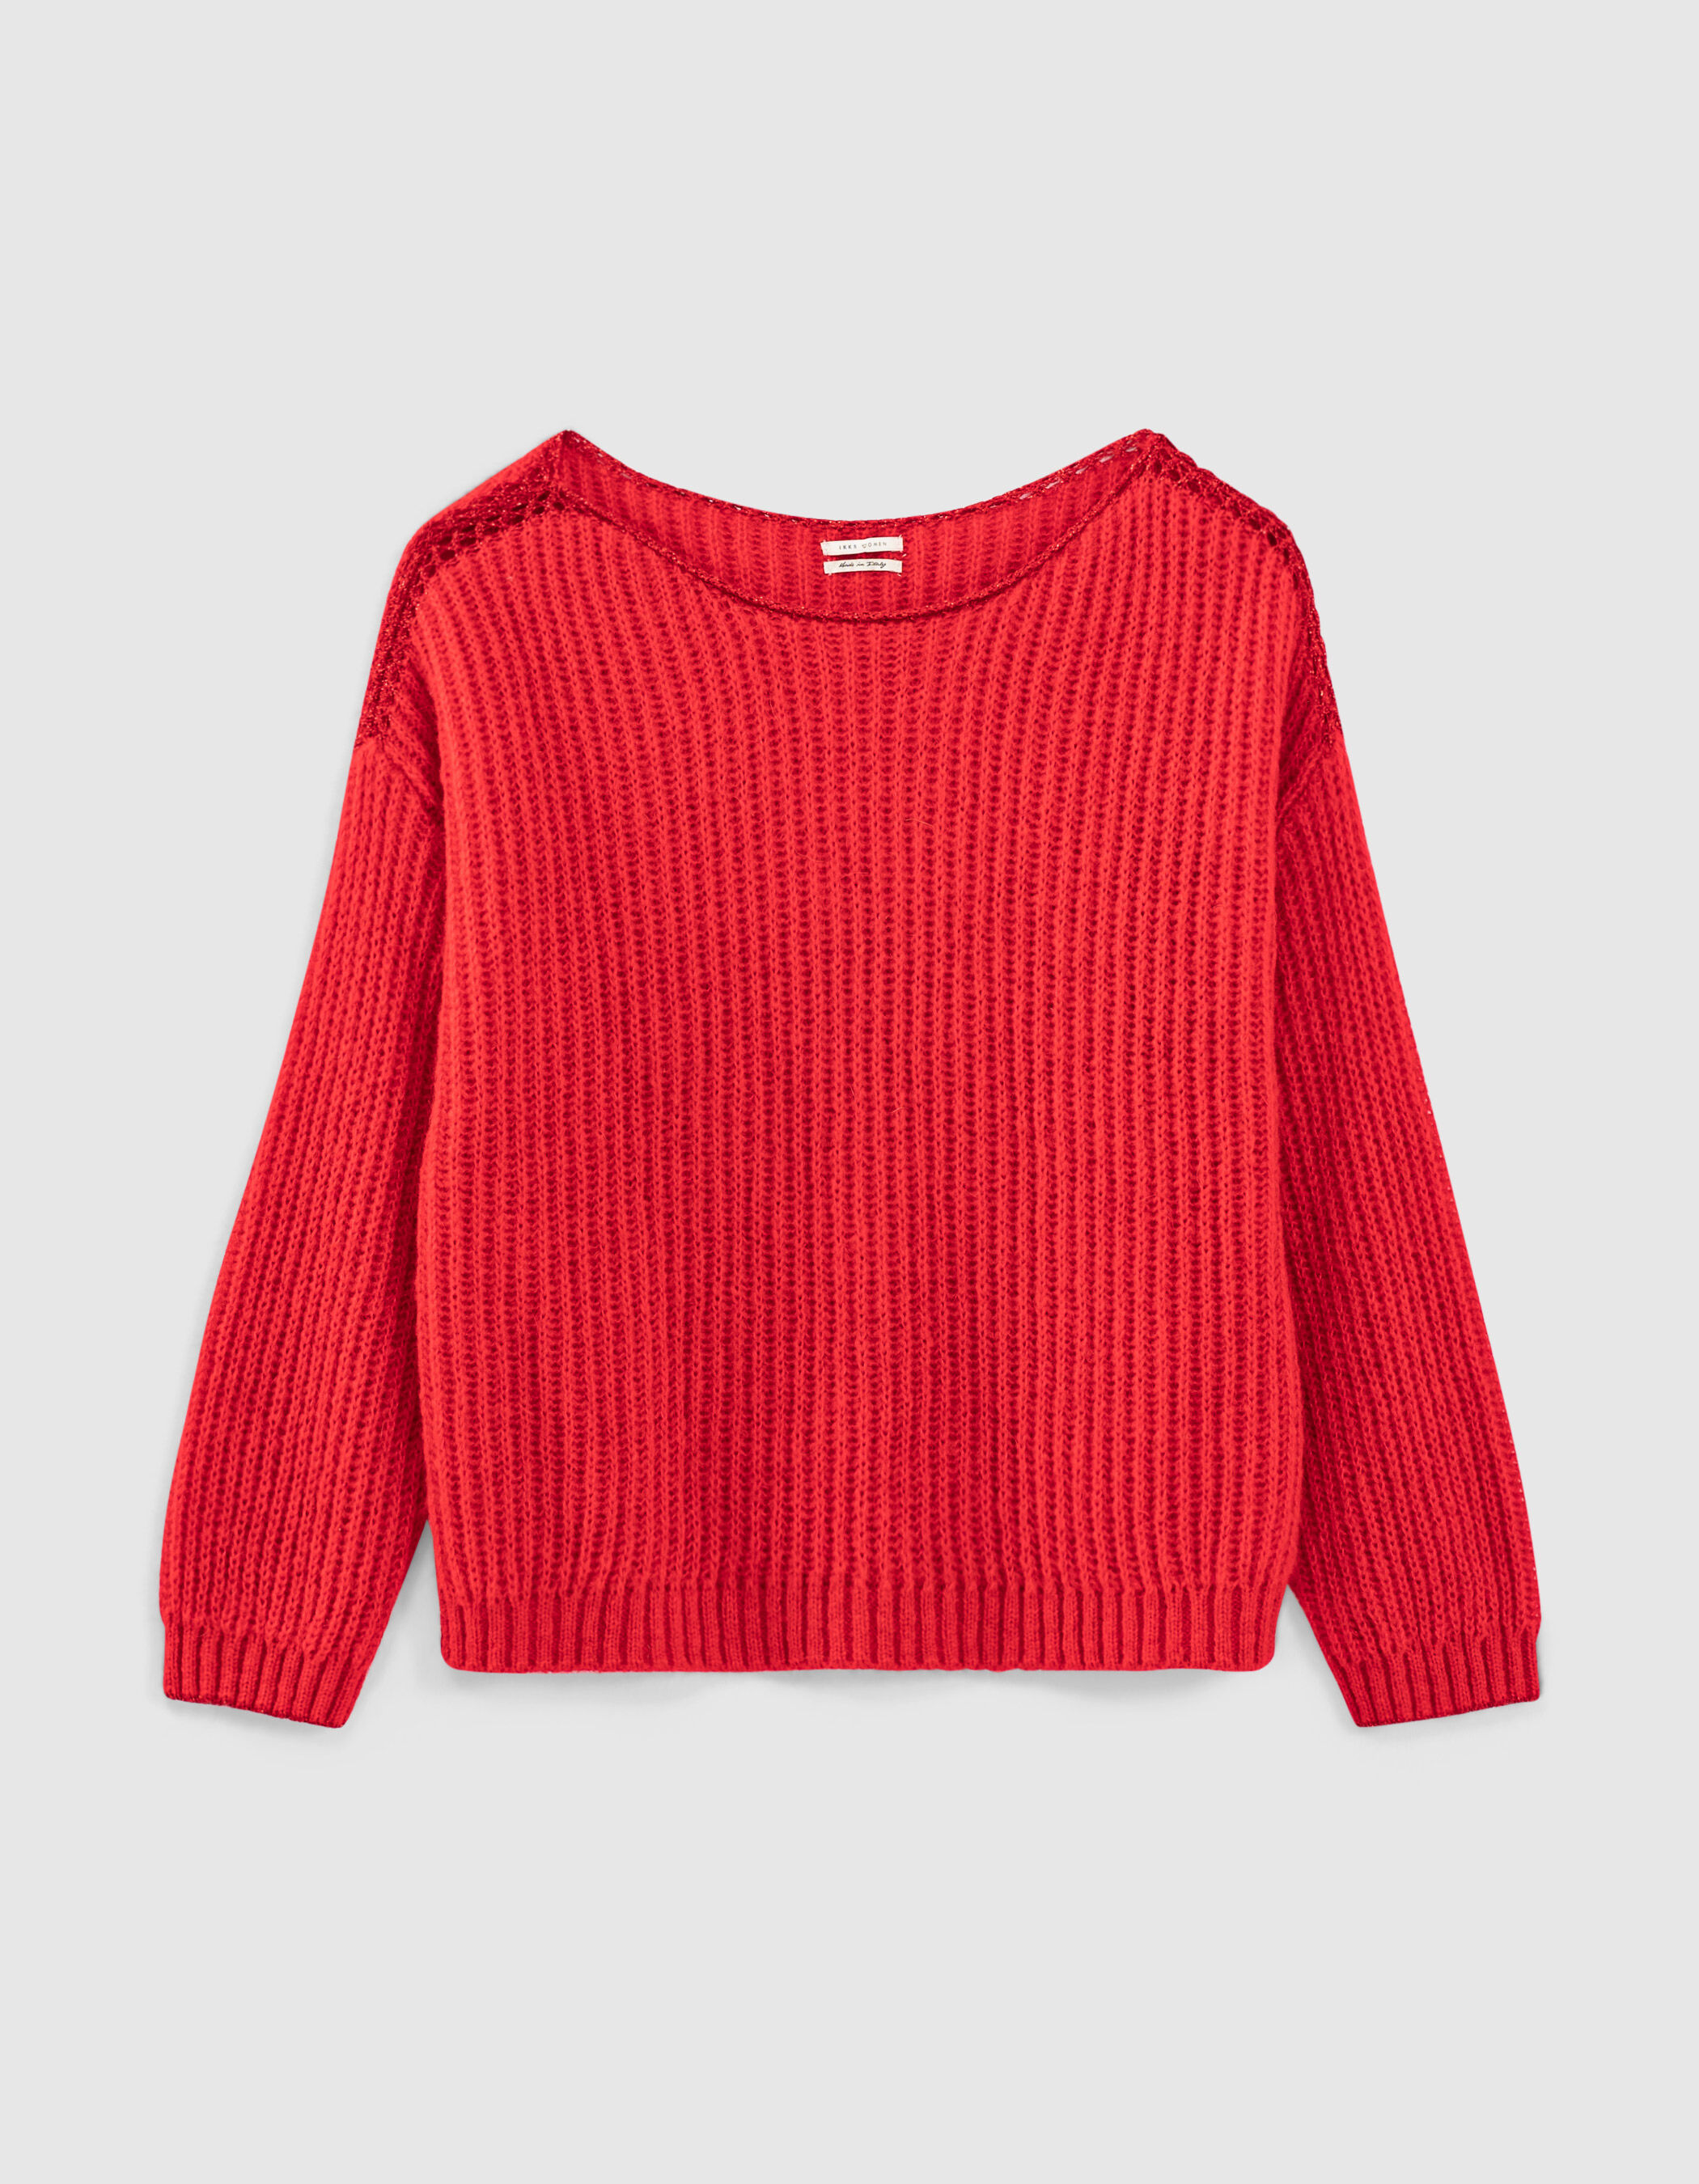 Women's red chunky knit sweater with mohair